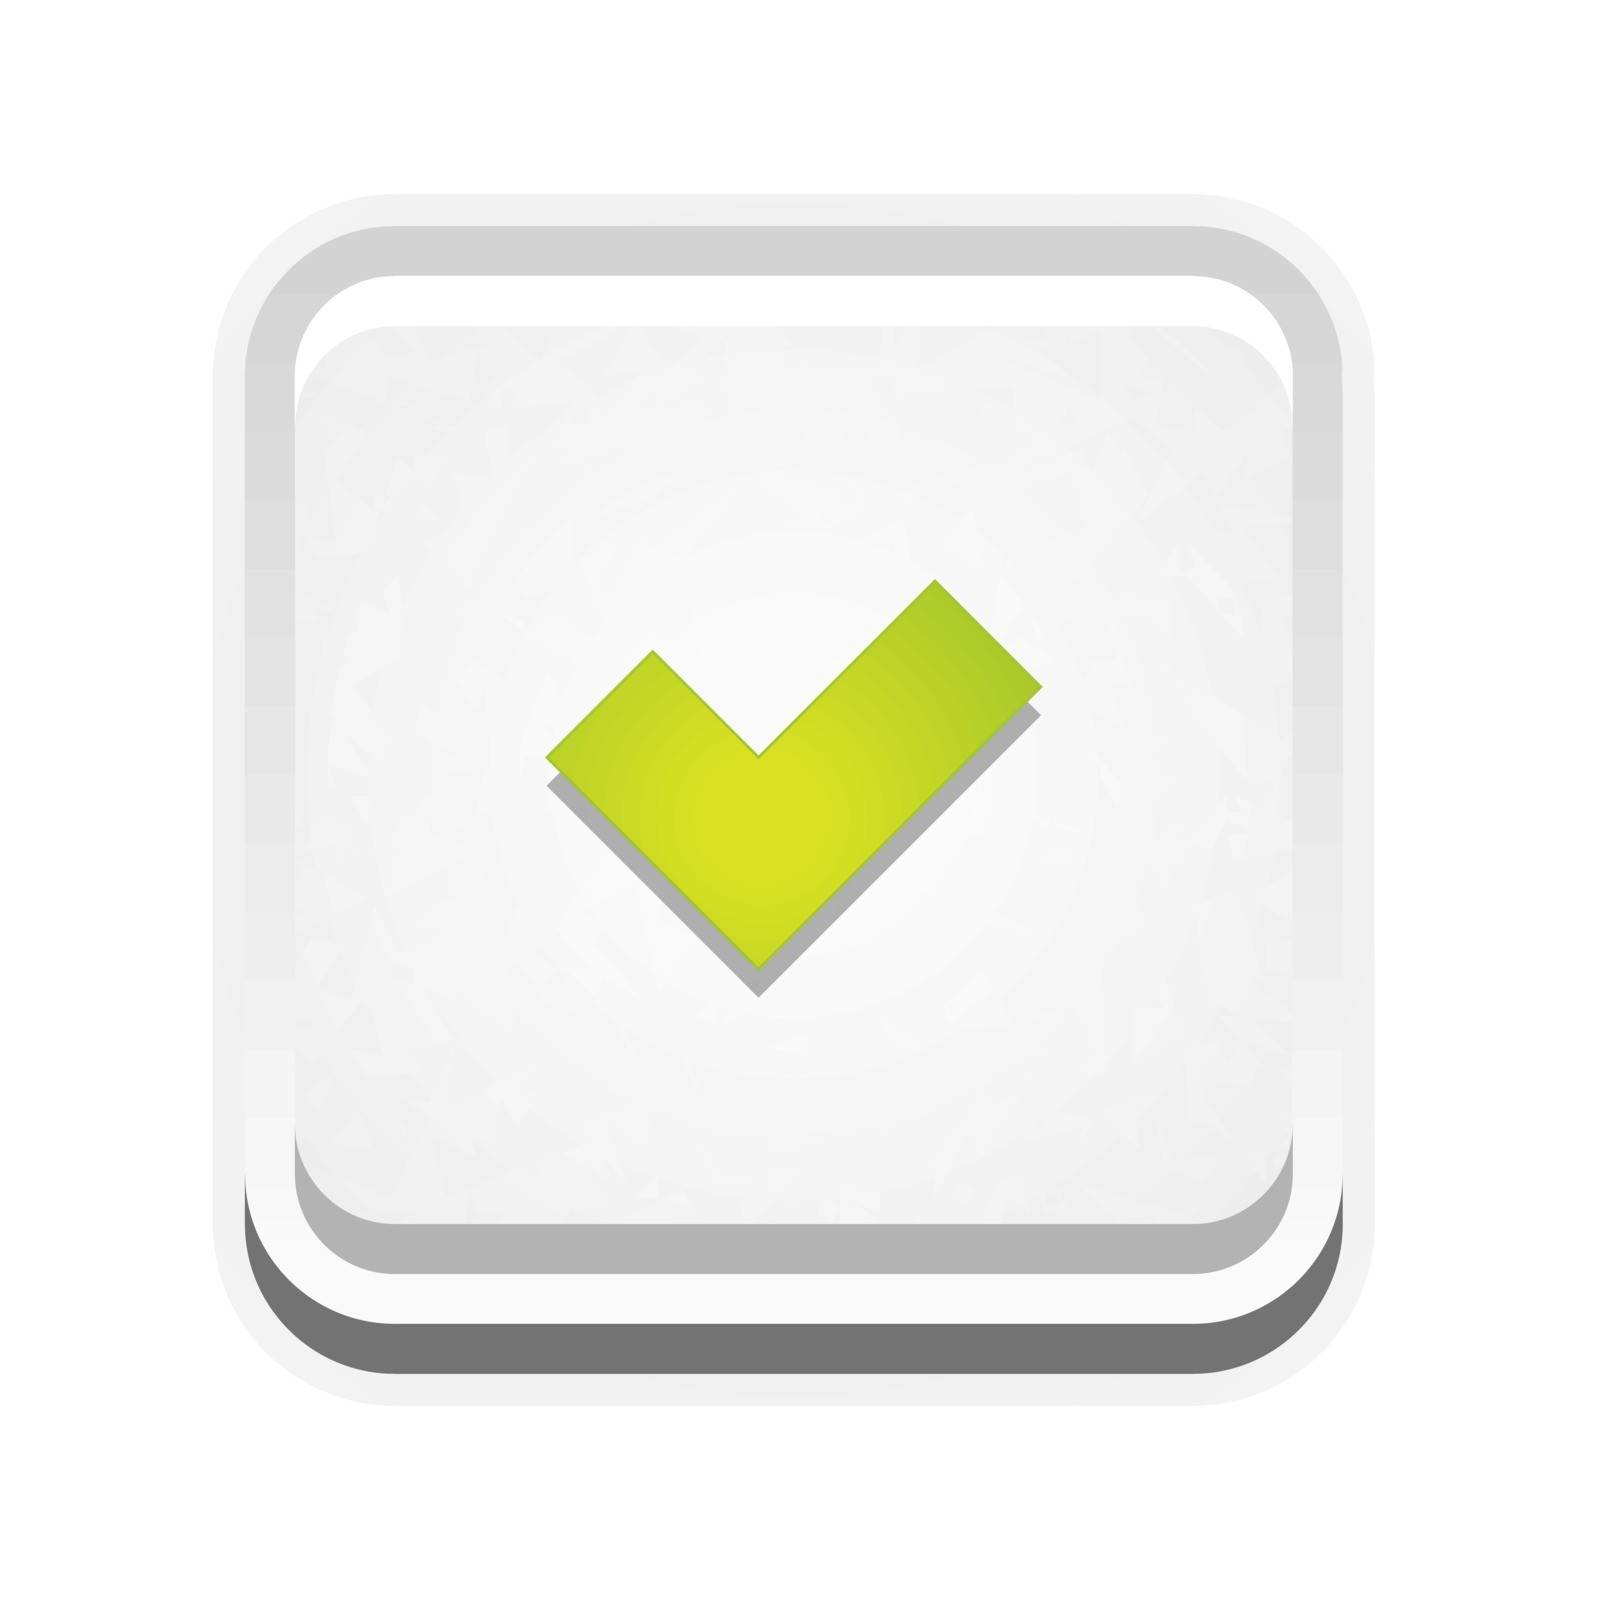 the white square button with green accept sign